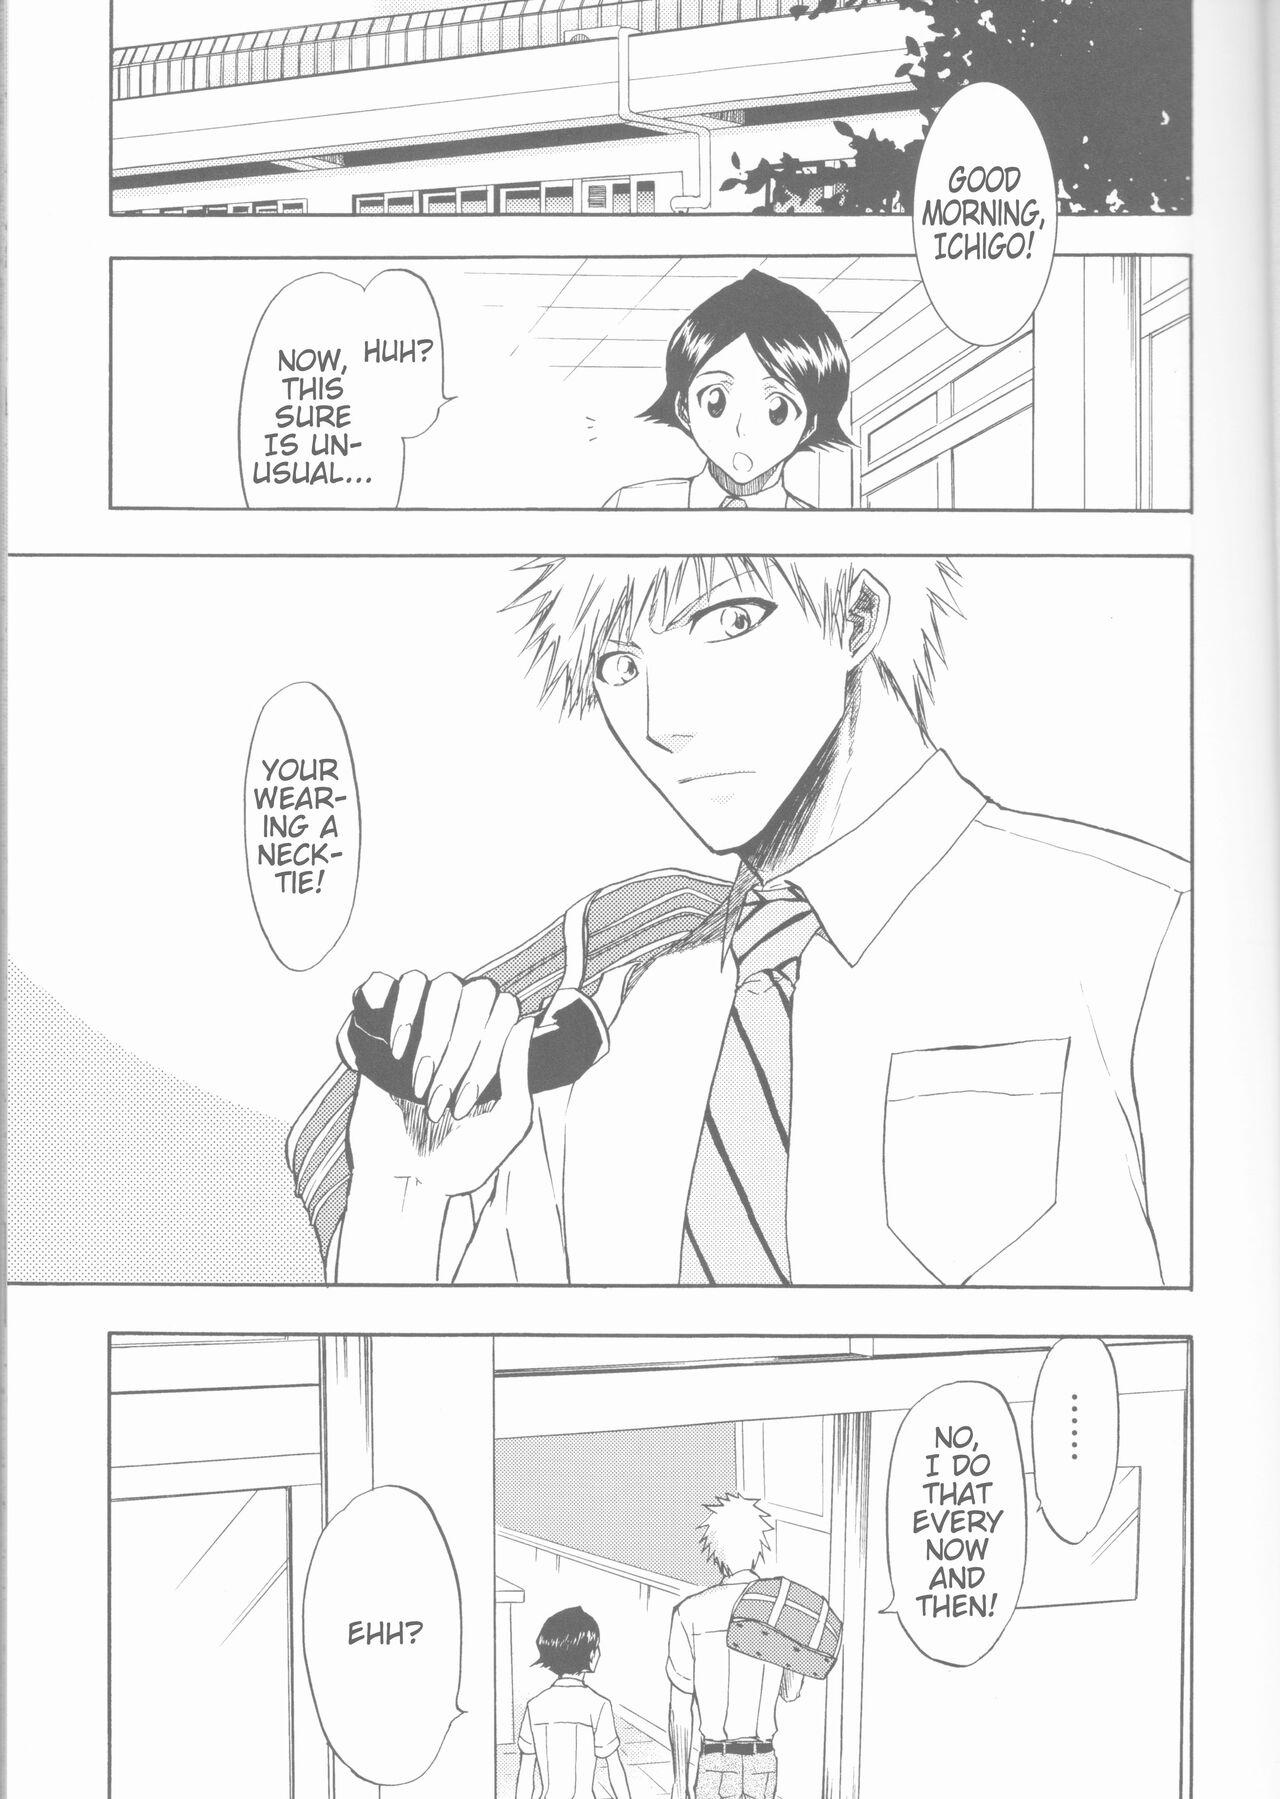 Bus 16Strawberry - Bleach Transex - Page 5